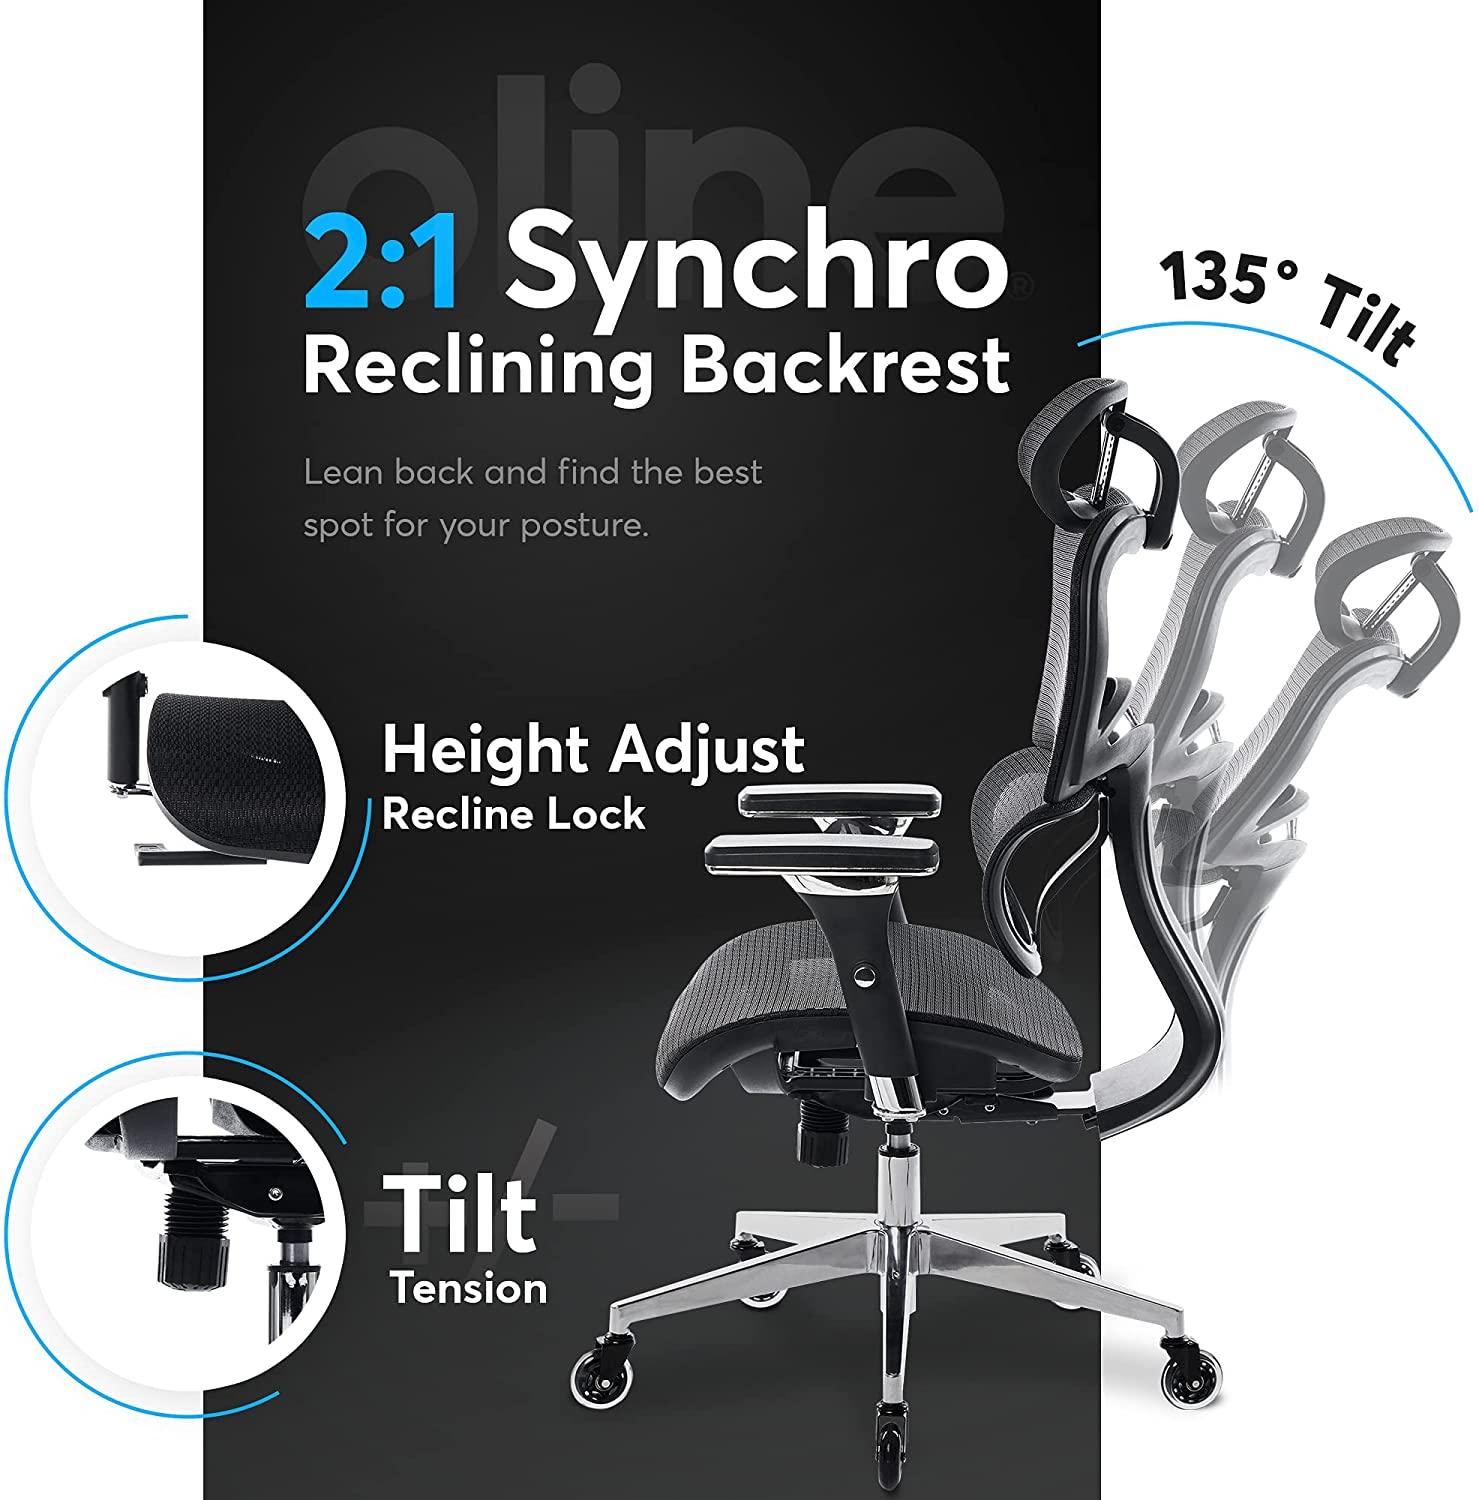 Where Should Lumbar Support Be Placed on an Ergonomic Office Chair